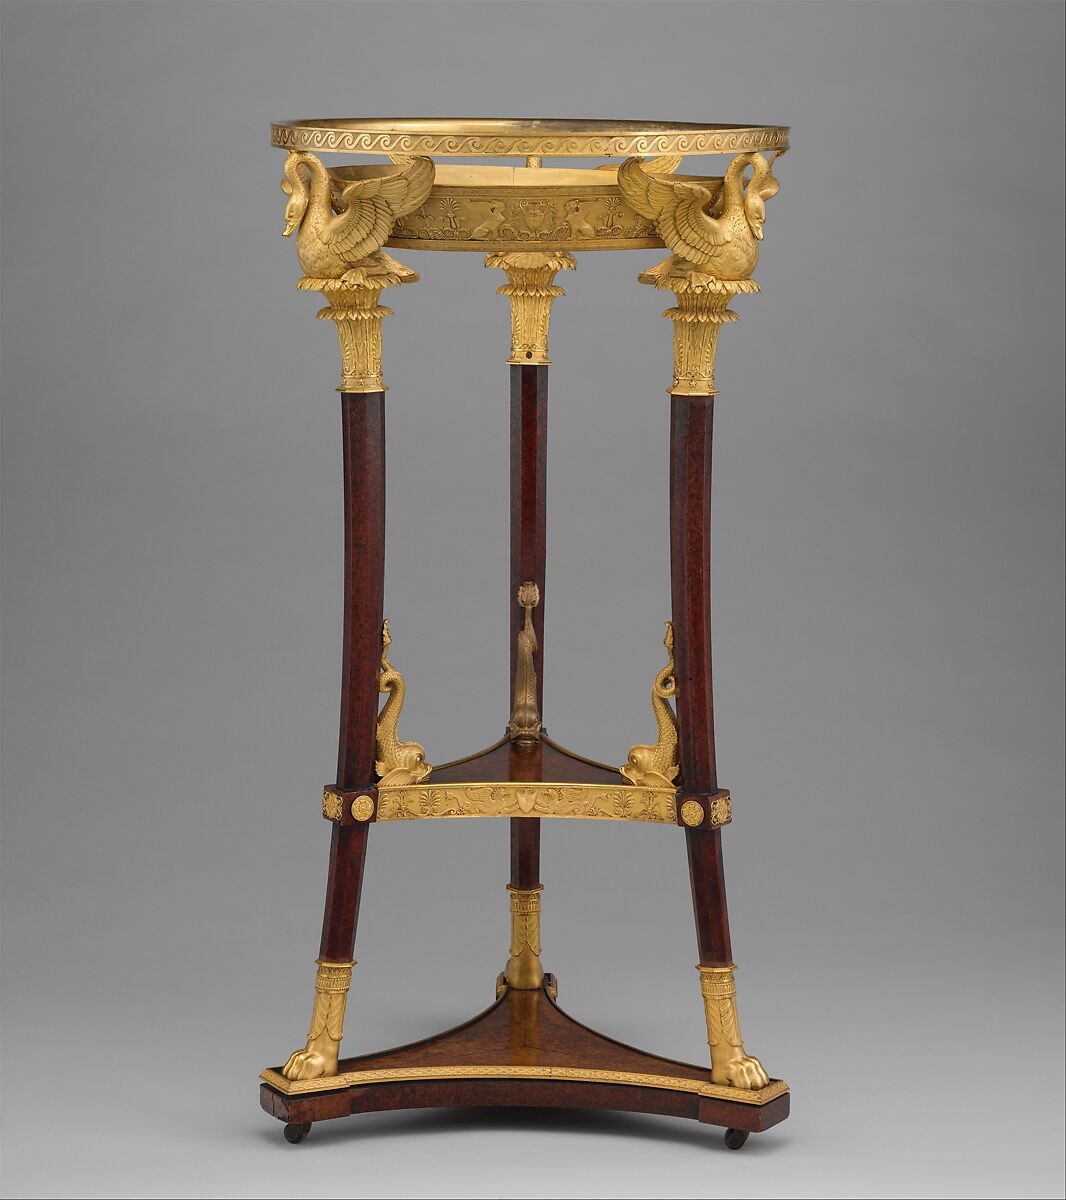 Washstand (athénienne or lavabo), Design attributed to Charles Percier (French, Paris 1764–1838 Paris), Legs, base and shelf of yew wood; gilt-bronze mounts; iron plate beneath shelf, French, Paris 